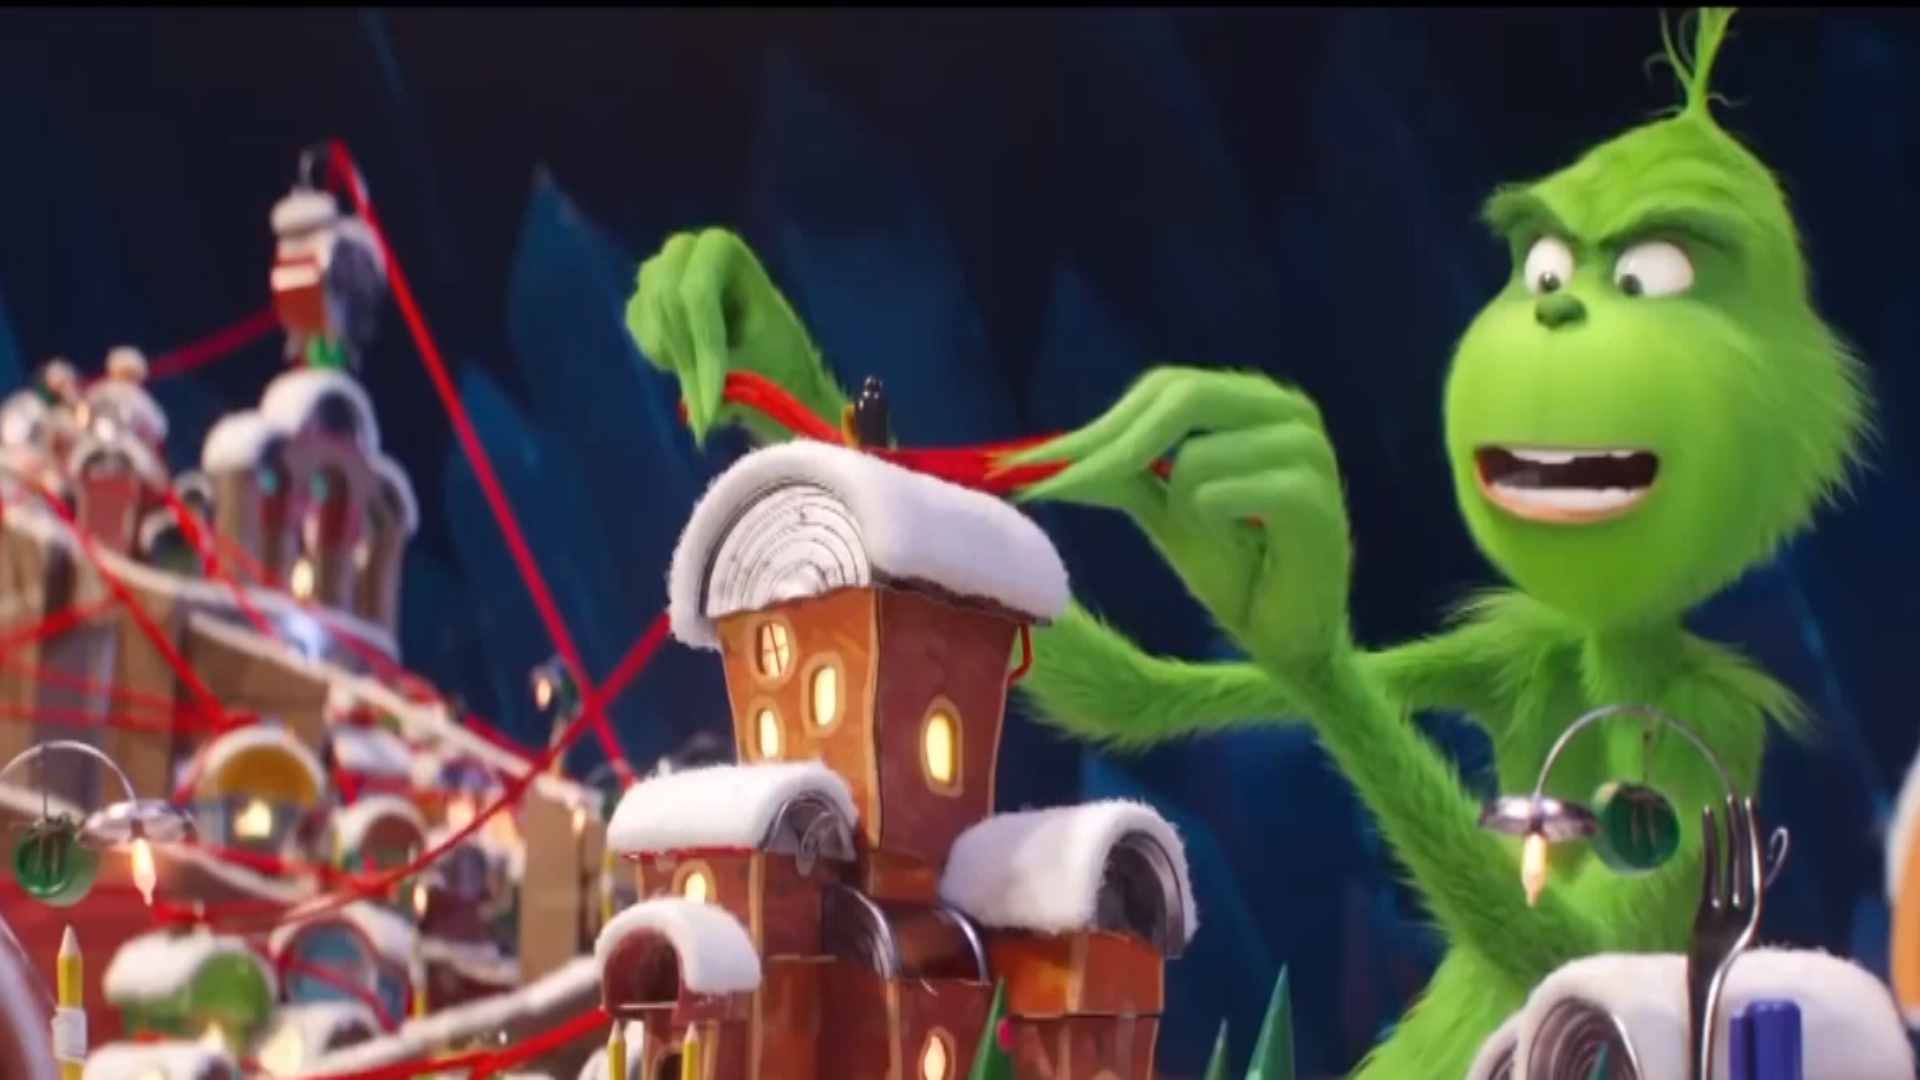 How The Grinch Stole The Christmas Ra Mắt Vào Giáng Sinh 2344